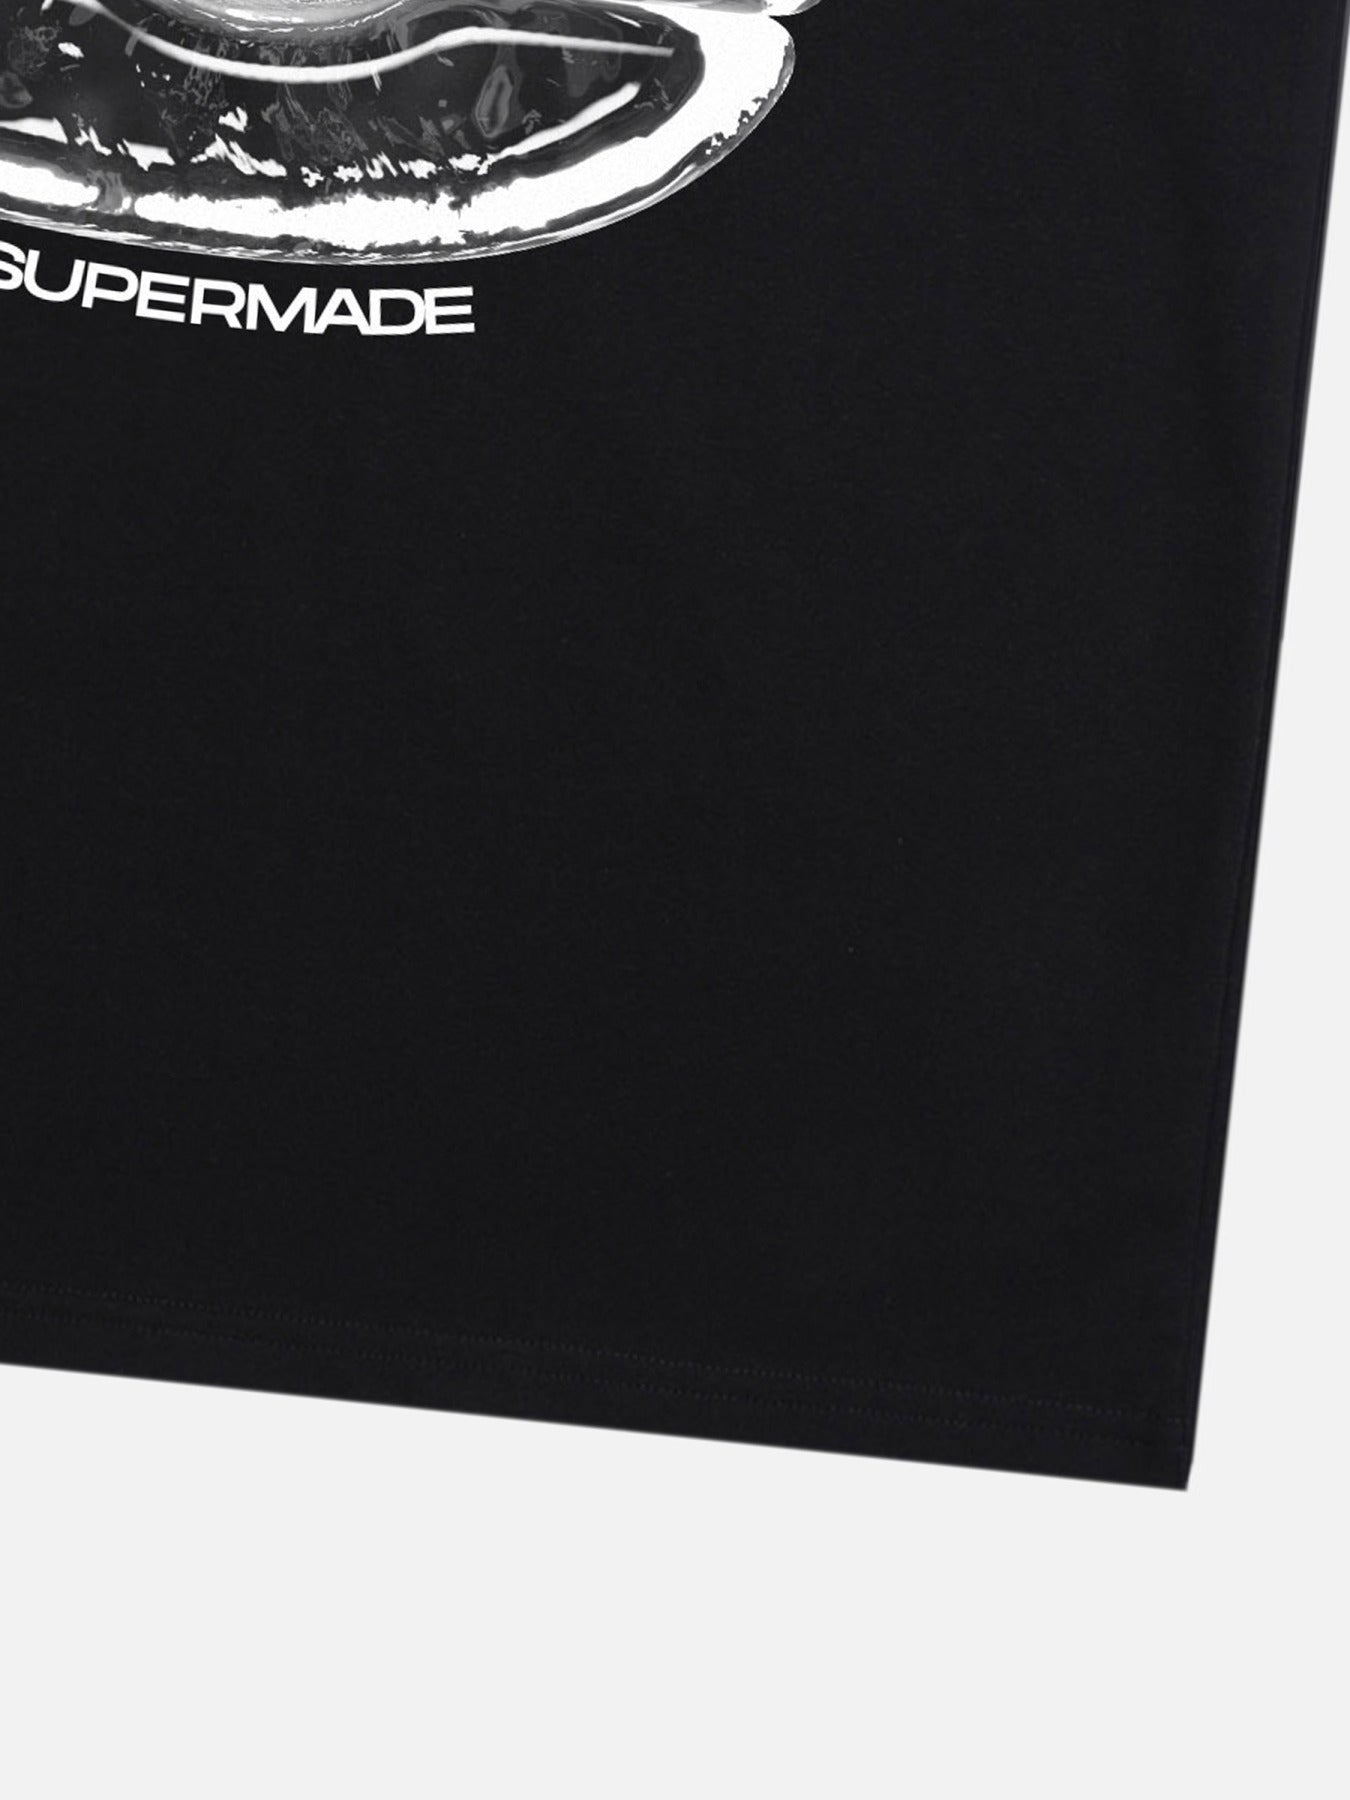 Thesupermade Print T-shirt